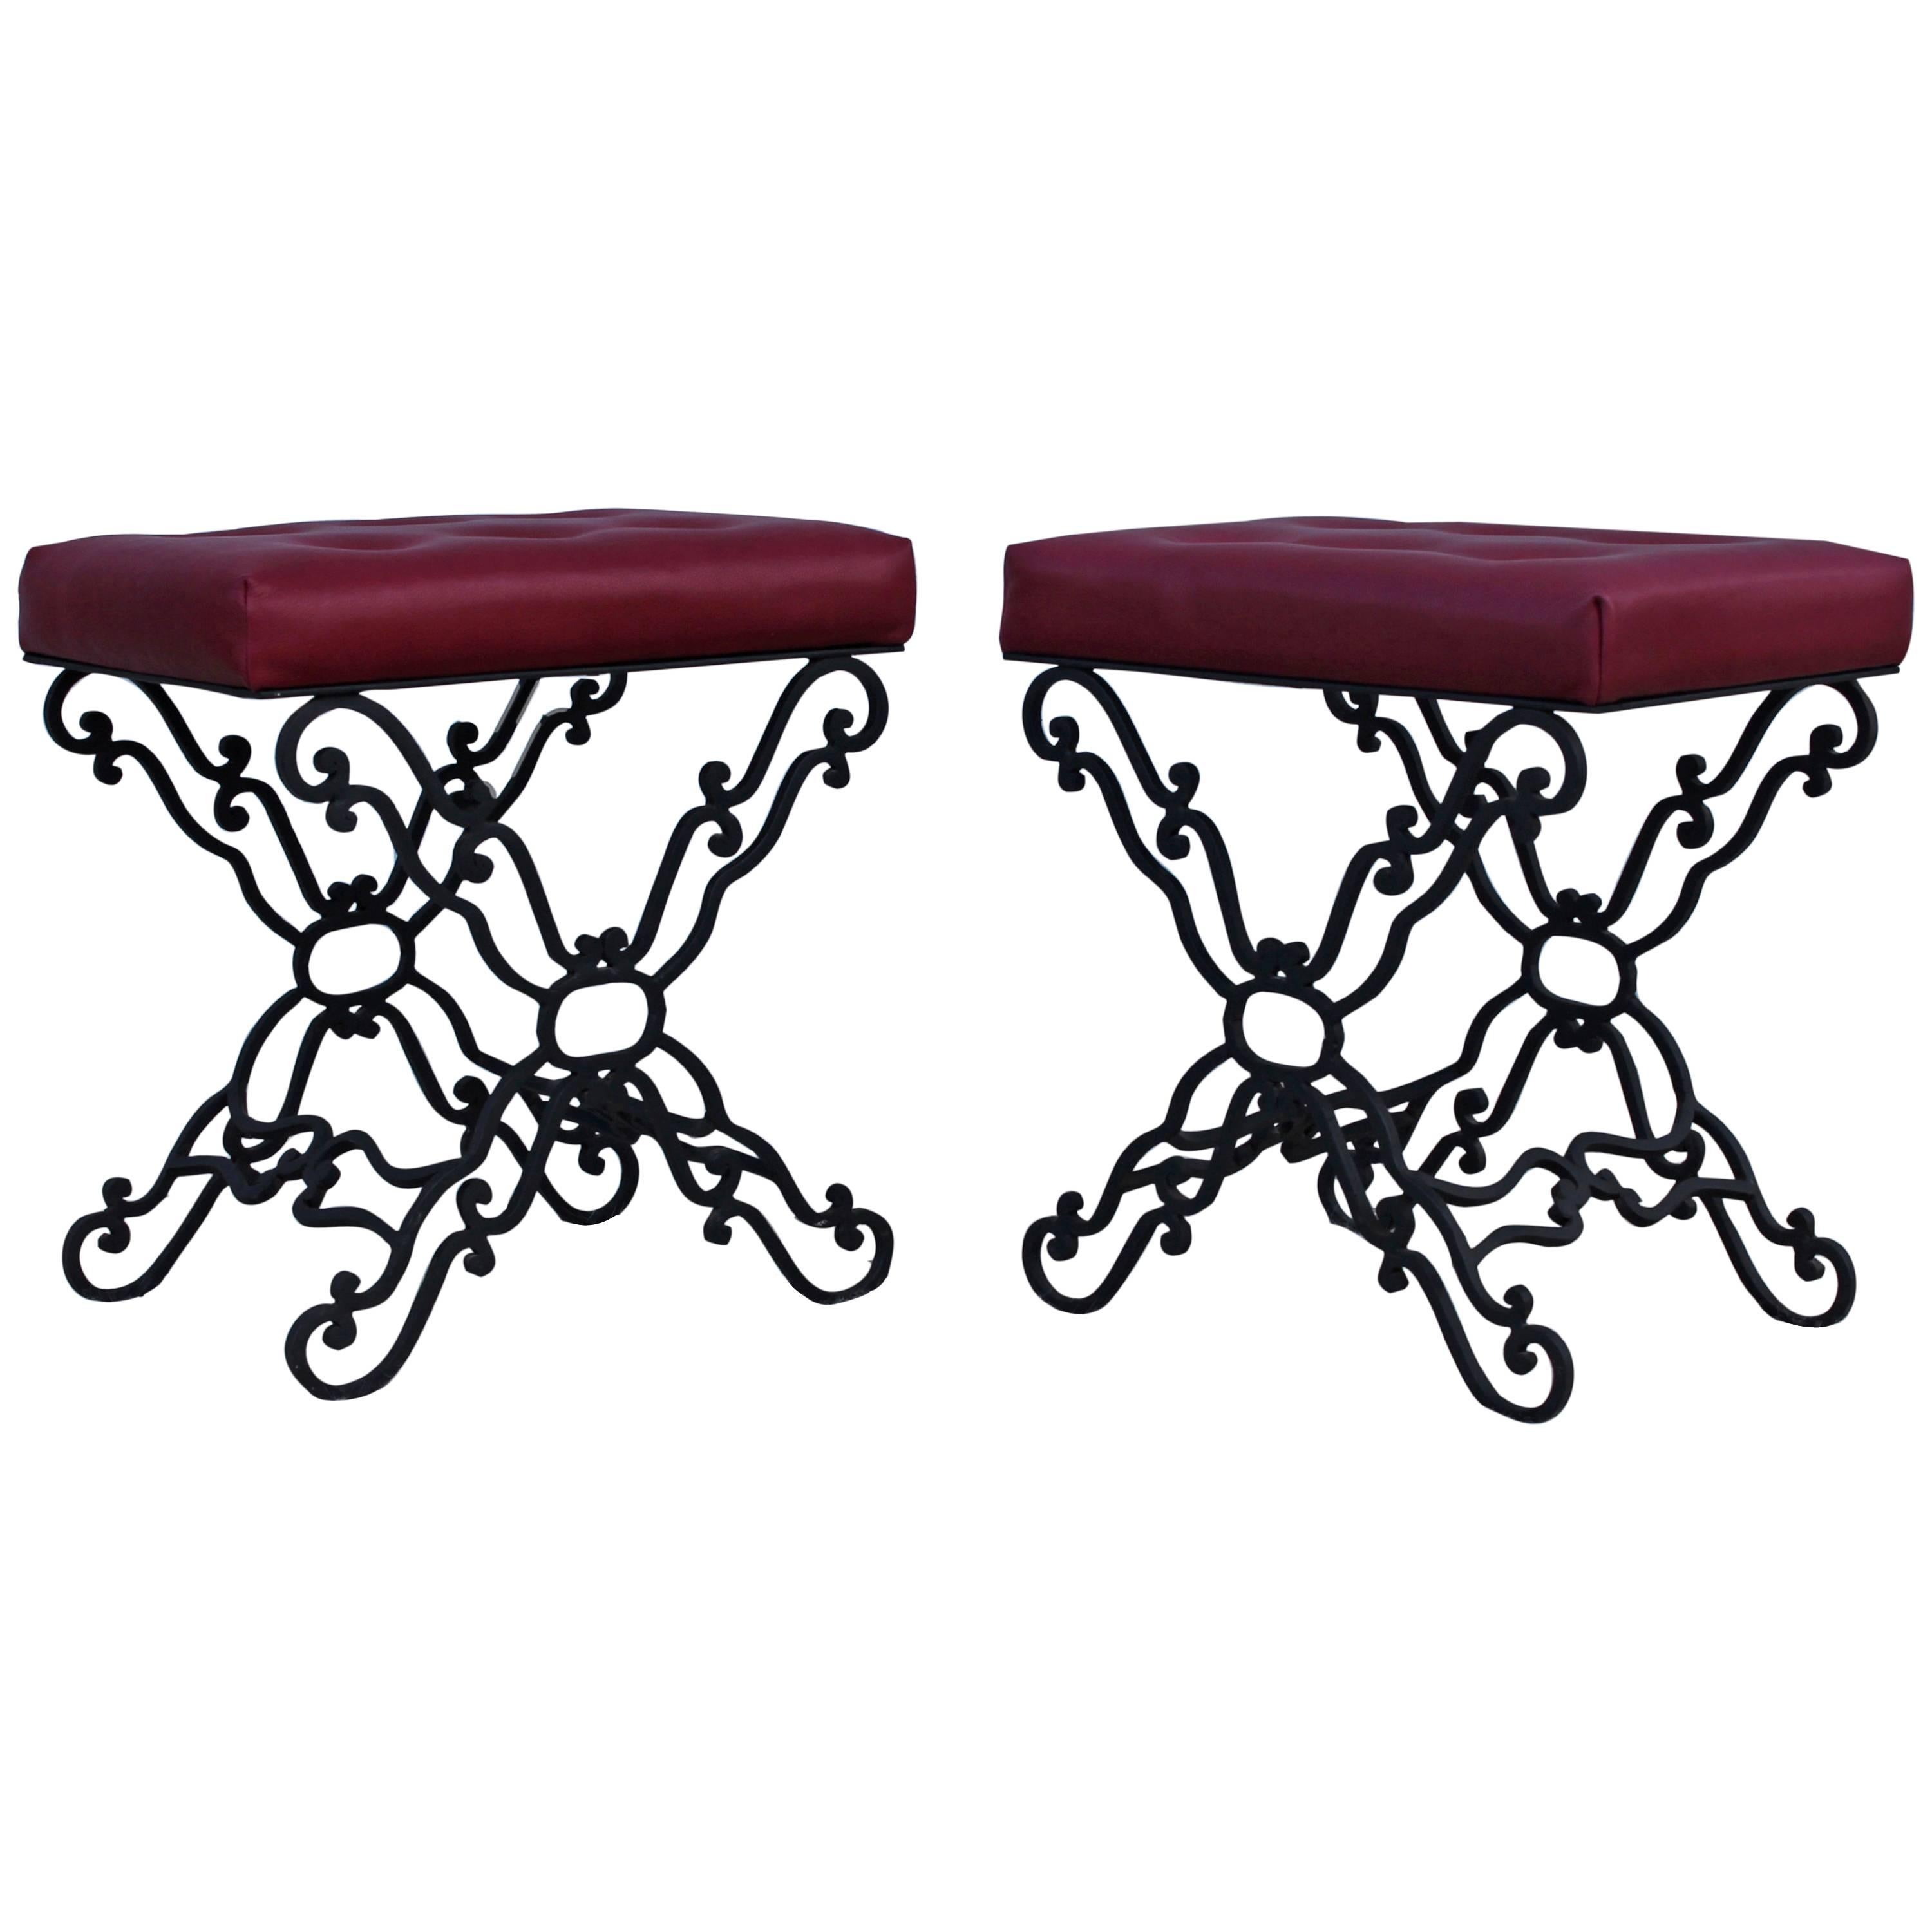 1960s Iron and Leather Ottomans